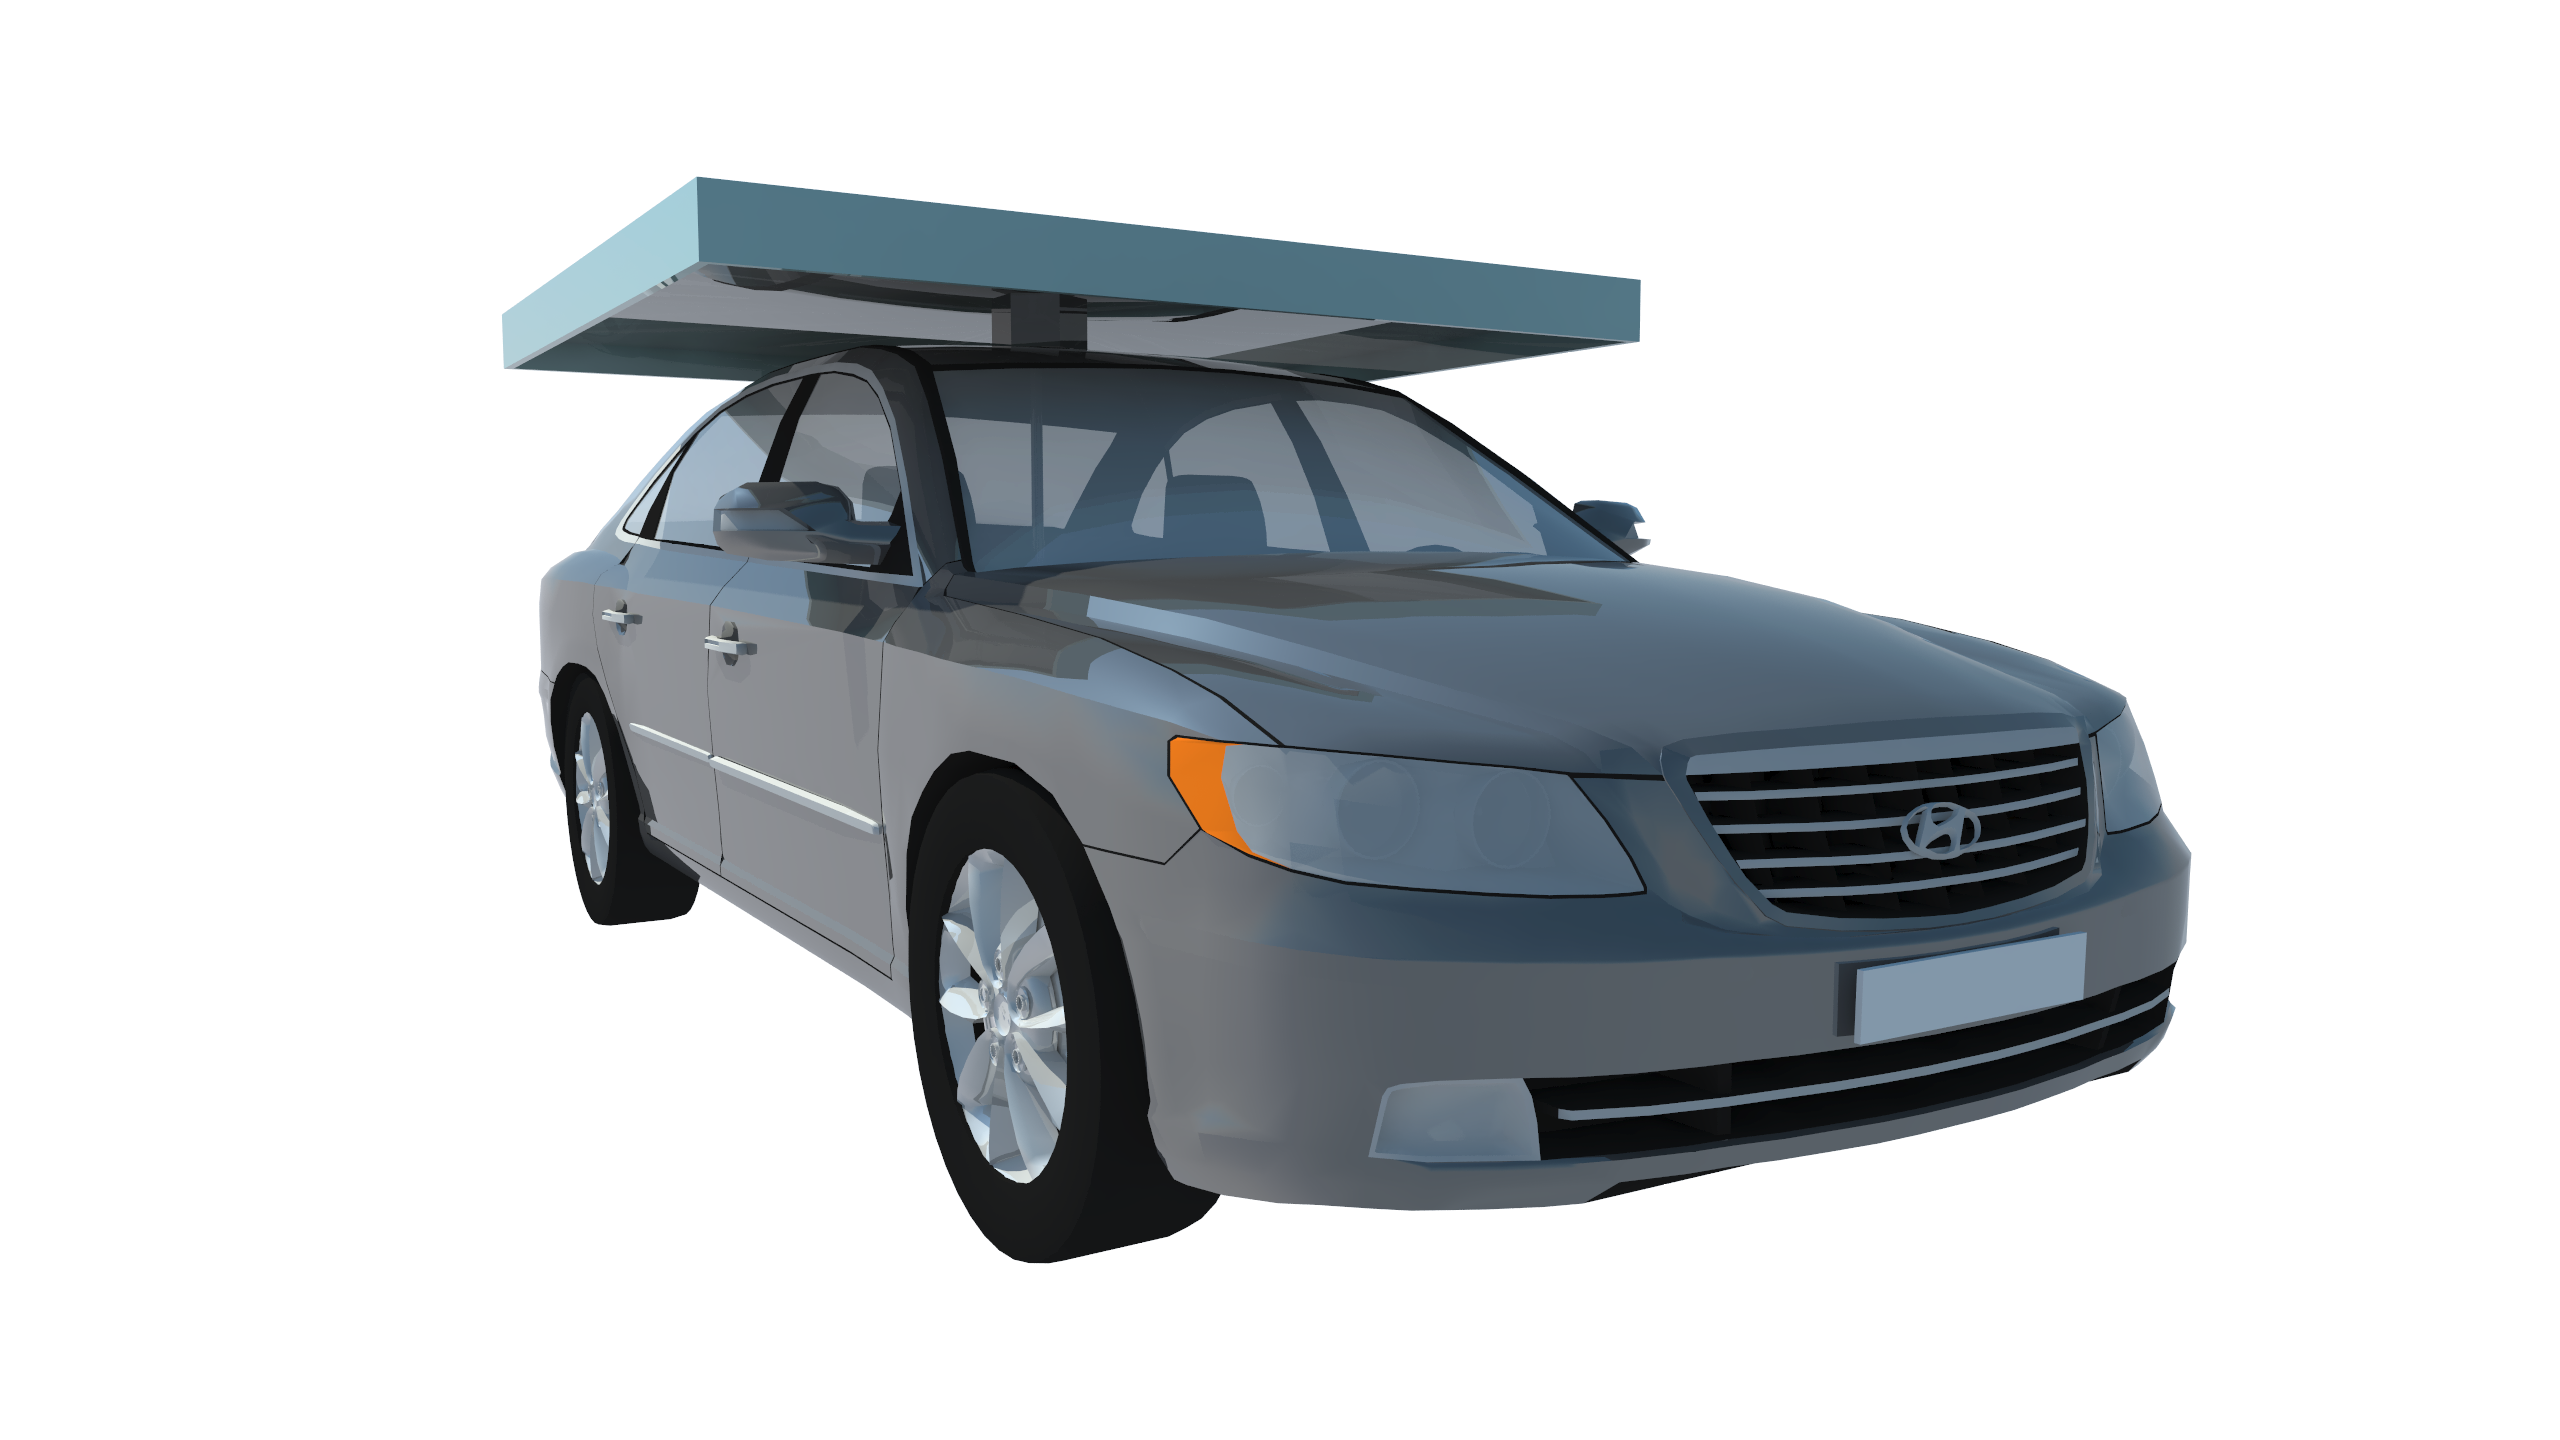 The Electronic Car Umbrella is an automobile invention designed to provide a portable and automatic shade for a vehicle.